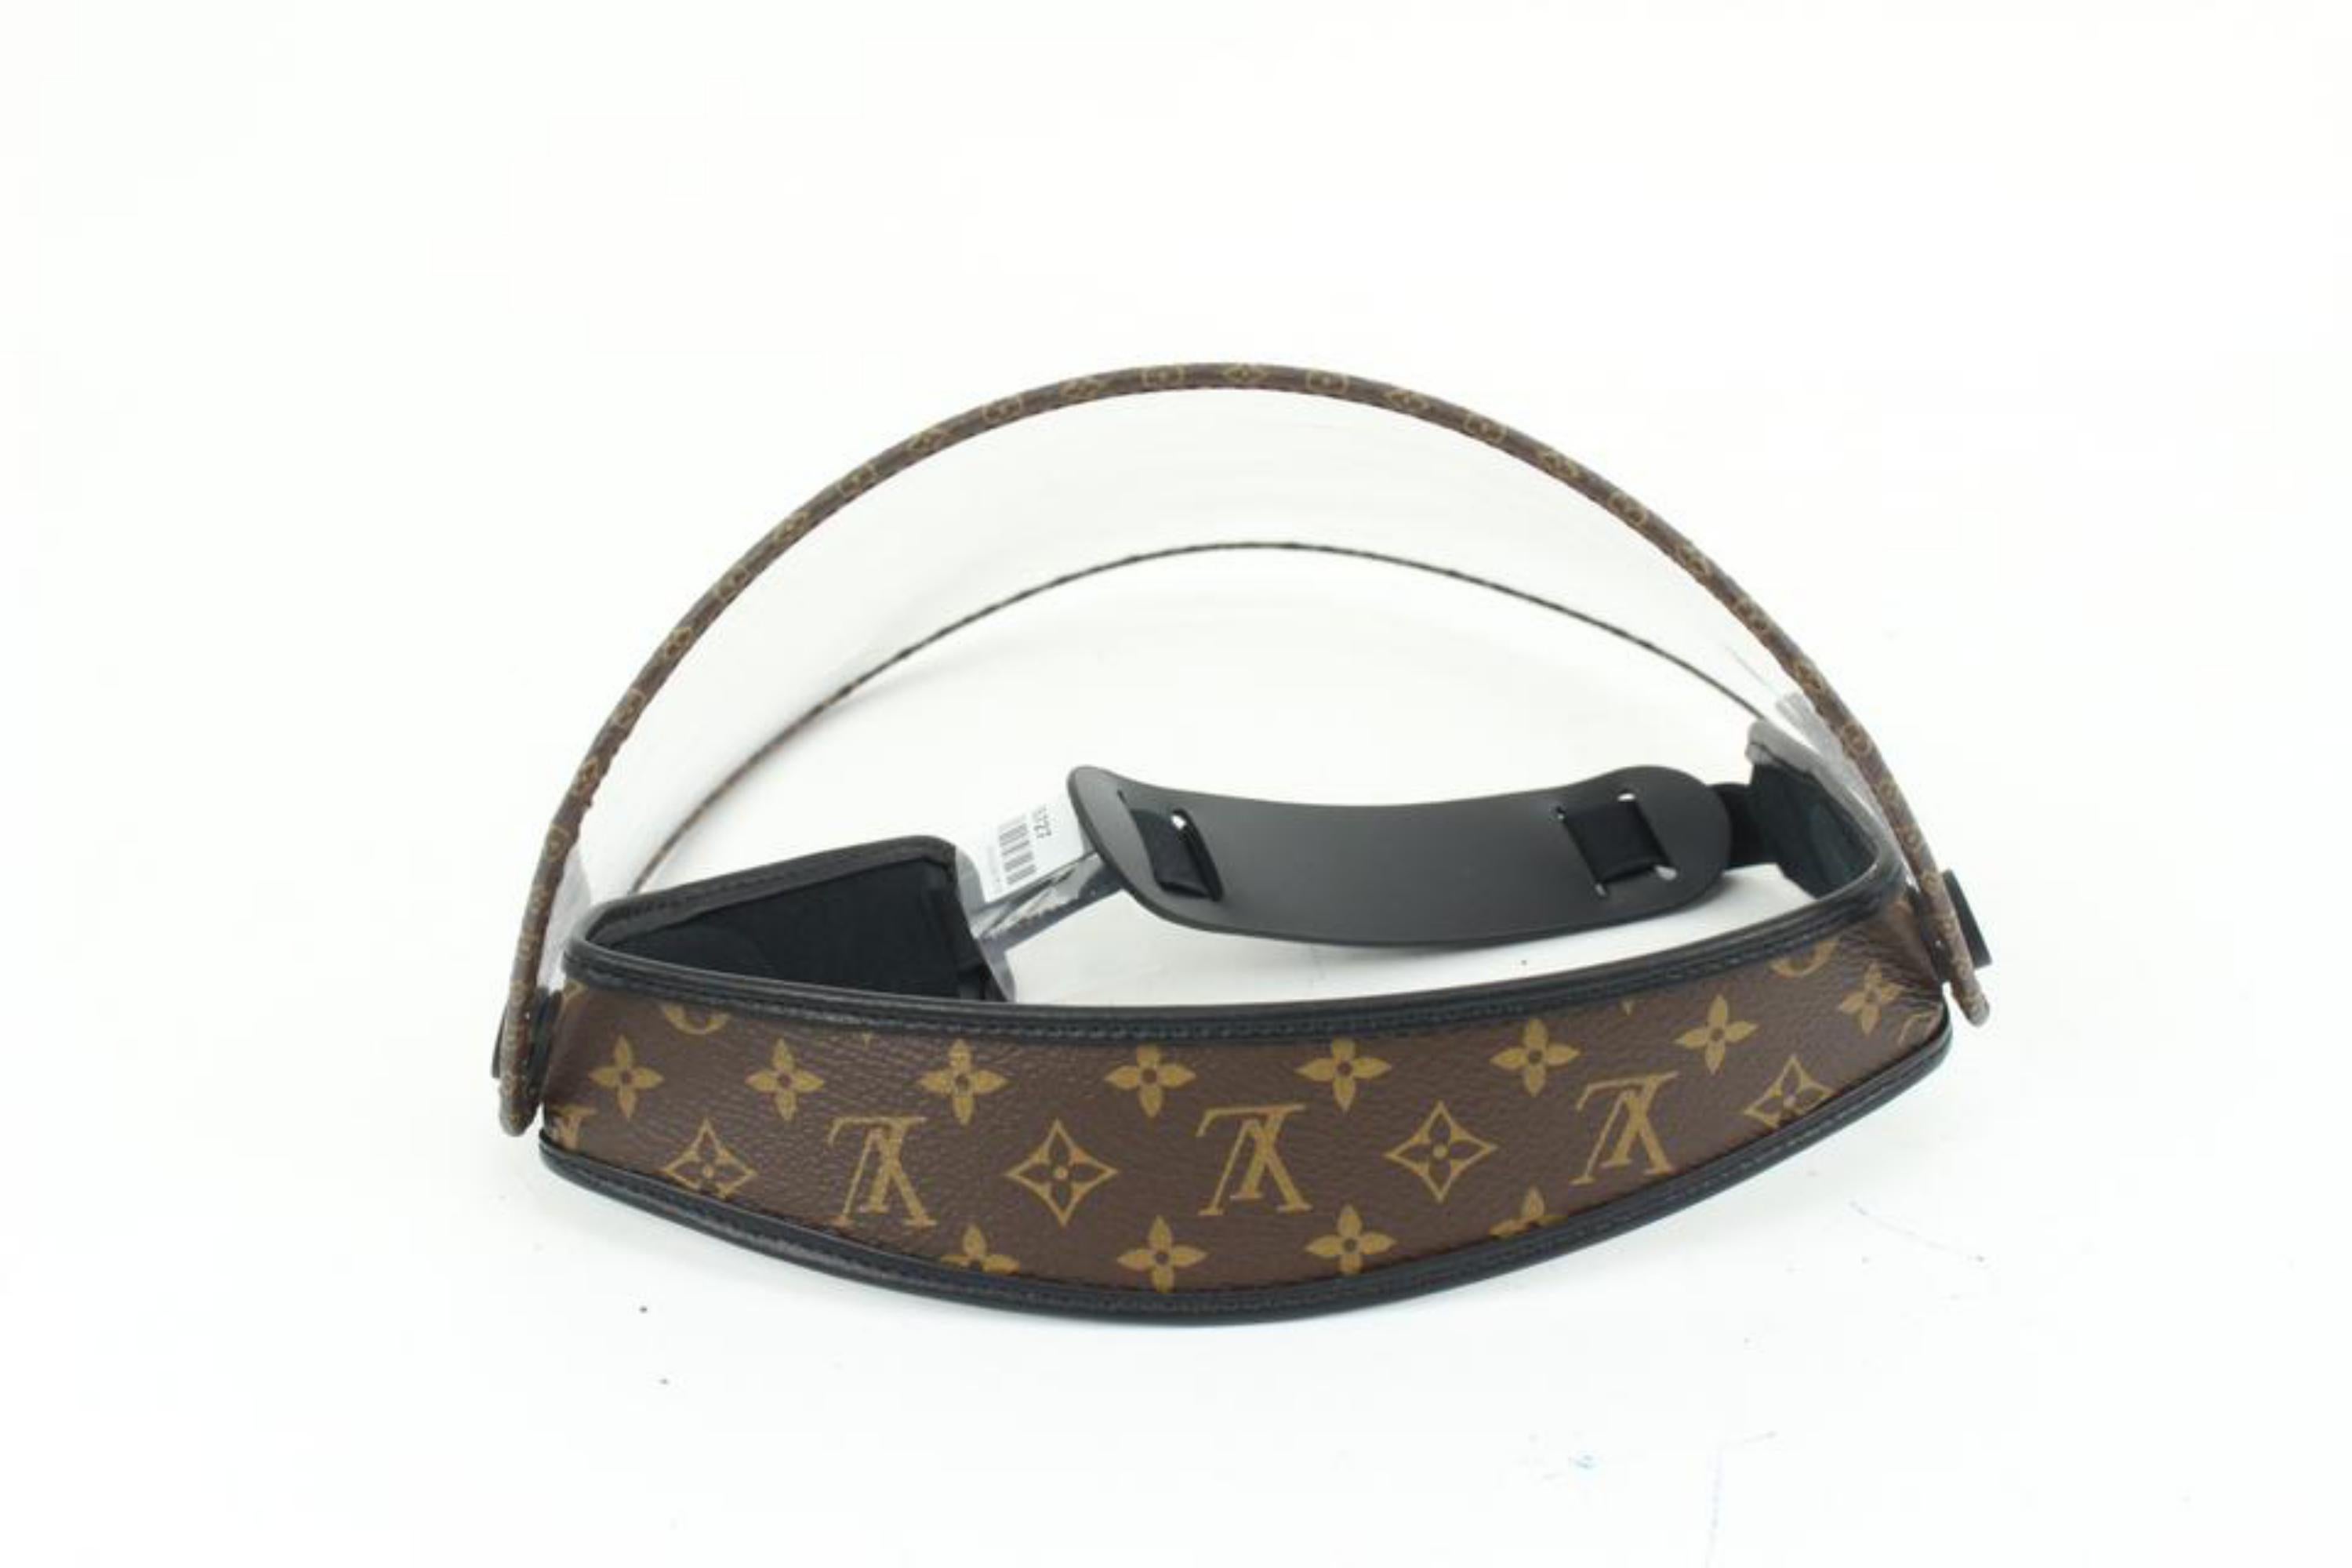 Louis Vuitton Unisex Adjustable Monogram Visor Face Mask Shield  18lv427  In New Condition For Sale In Dix hills, NY